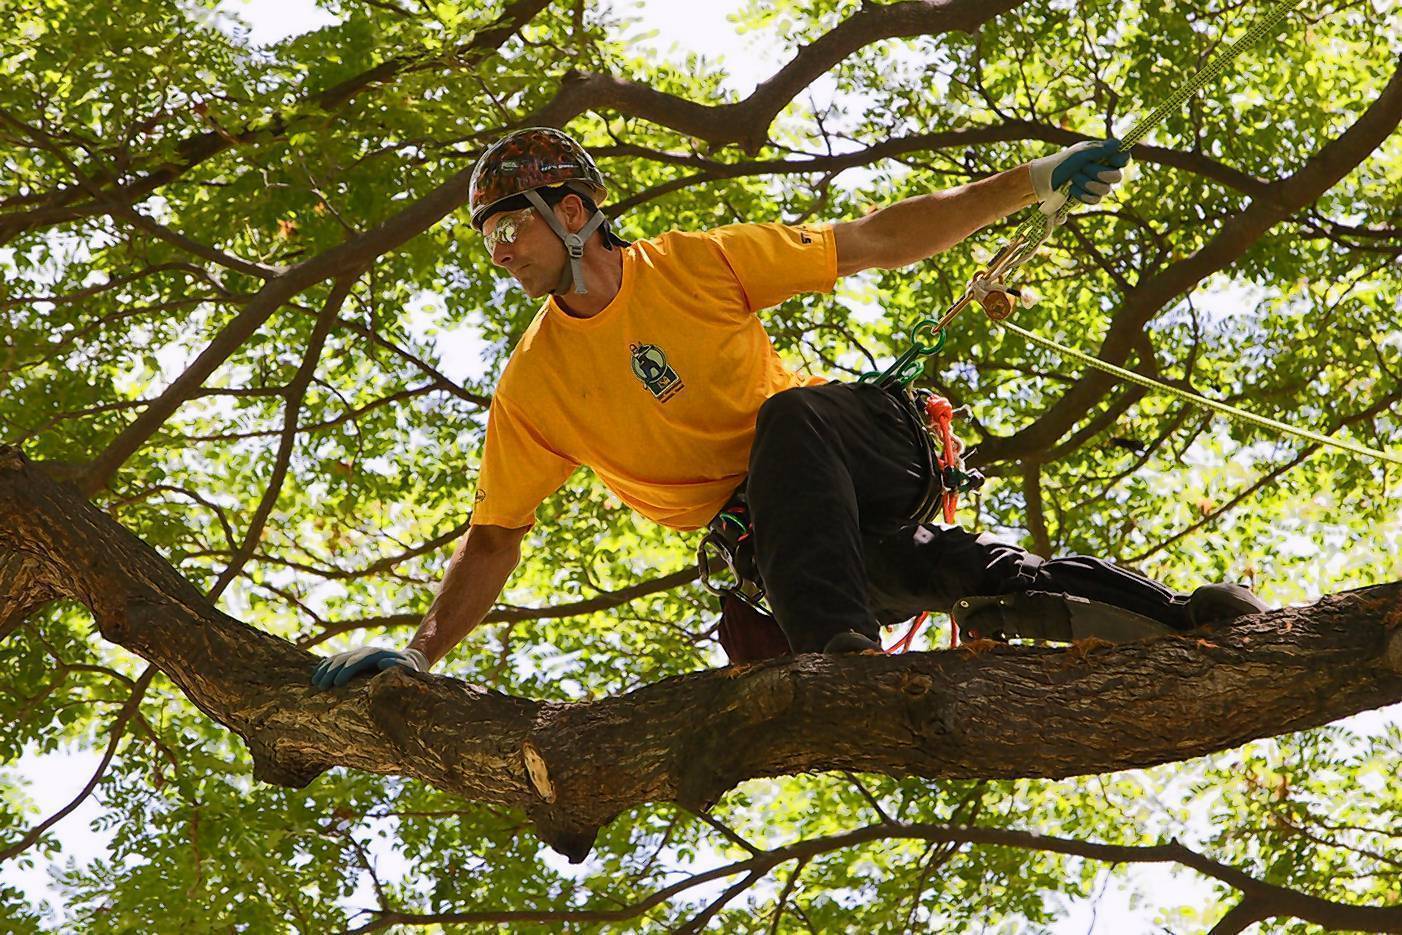 Champion tree  climber and arborist shares his tips and 